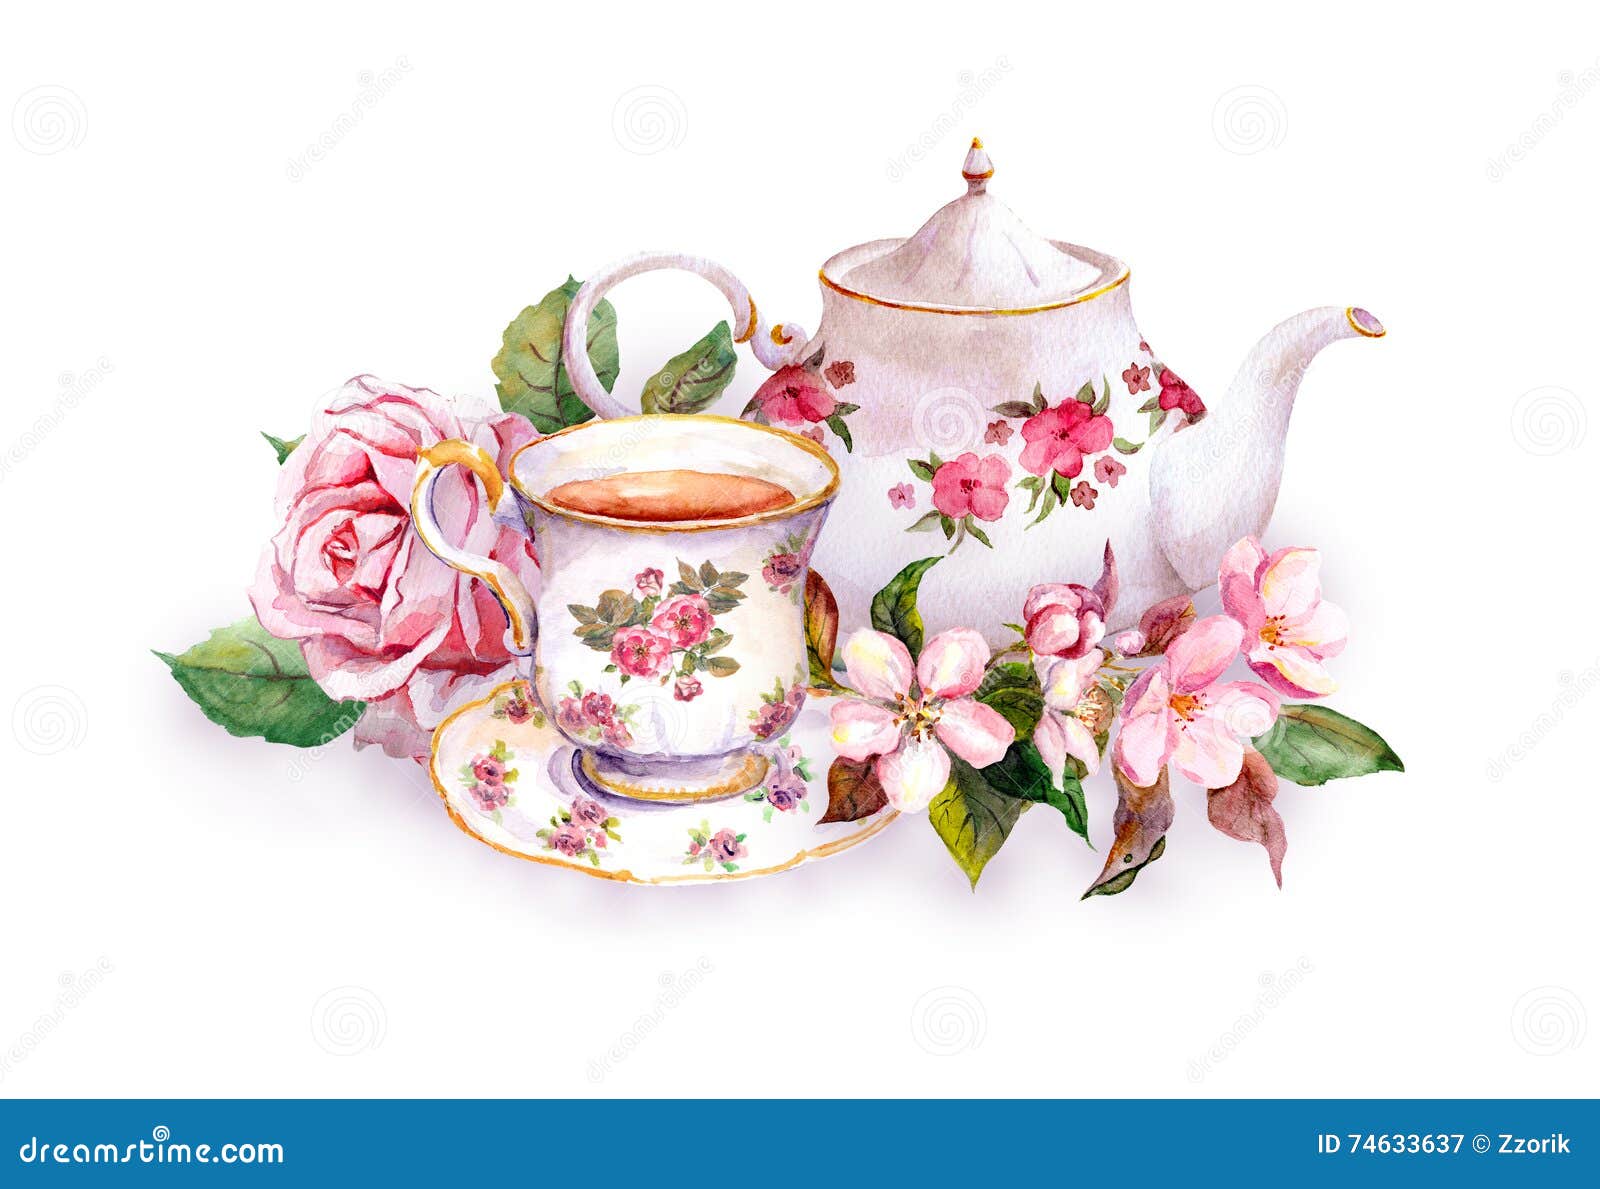 teacup, tea pot, pink flowers - rose and cherry blossom. watercolor